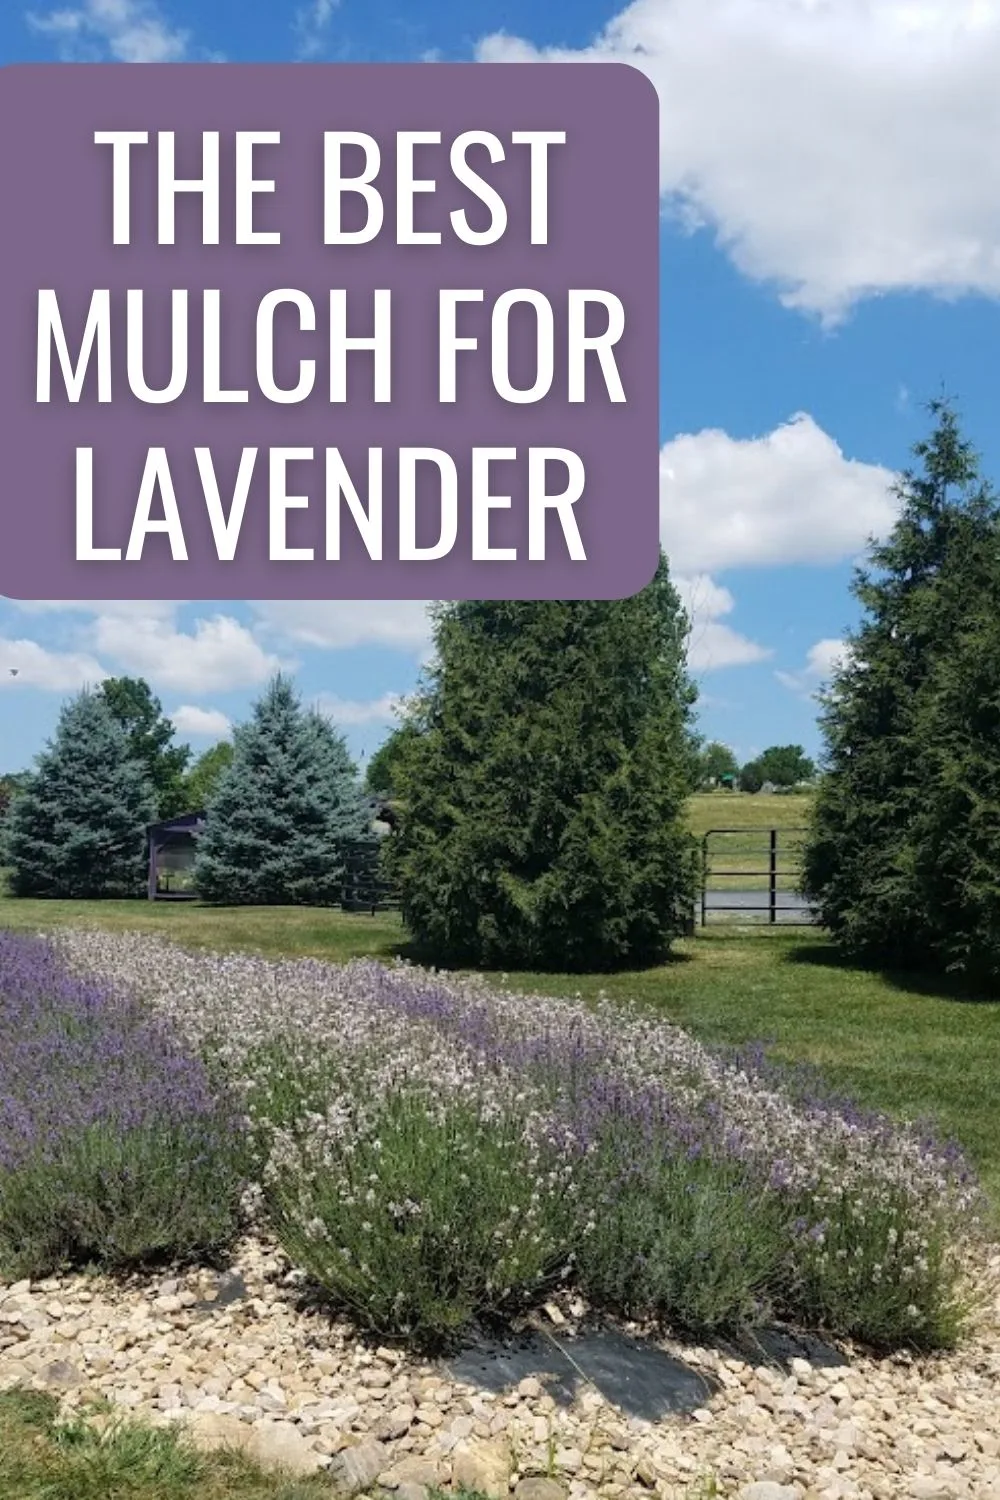 The best mulch for lavender.